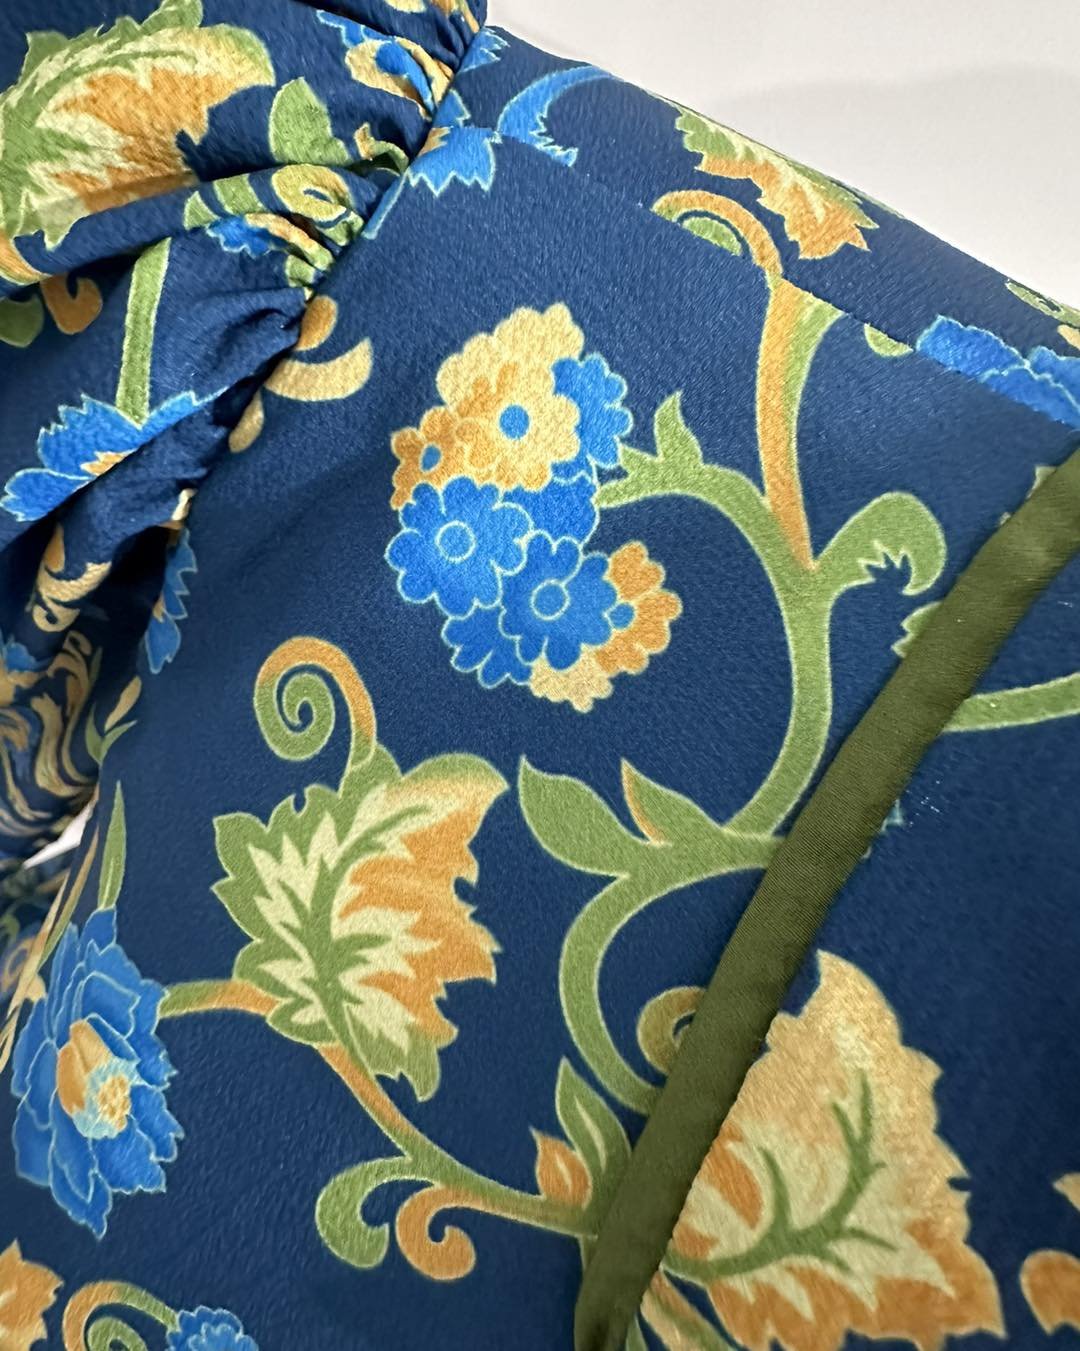 Loving the versatile colour palette in this fabric, allowing you to accentuate different colors with accessories. 

#custommade #madeforyou #versatility #colourpalette #accessories #fotf #australianmade